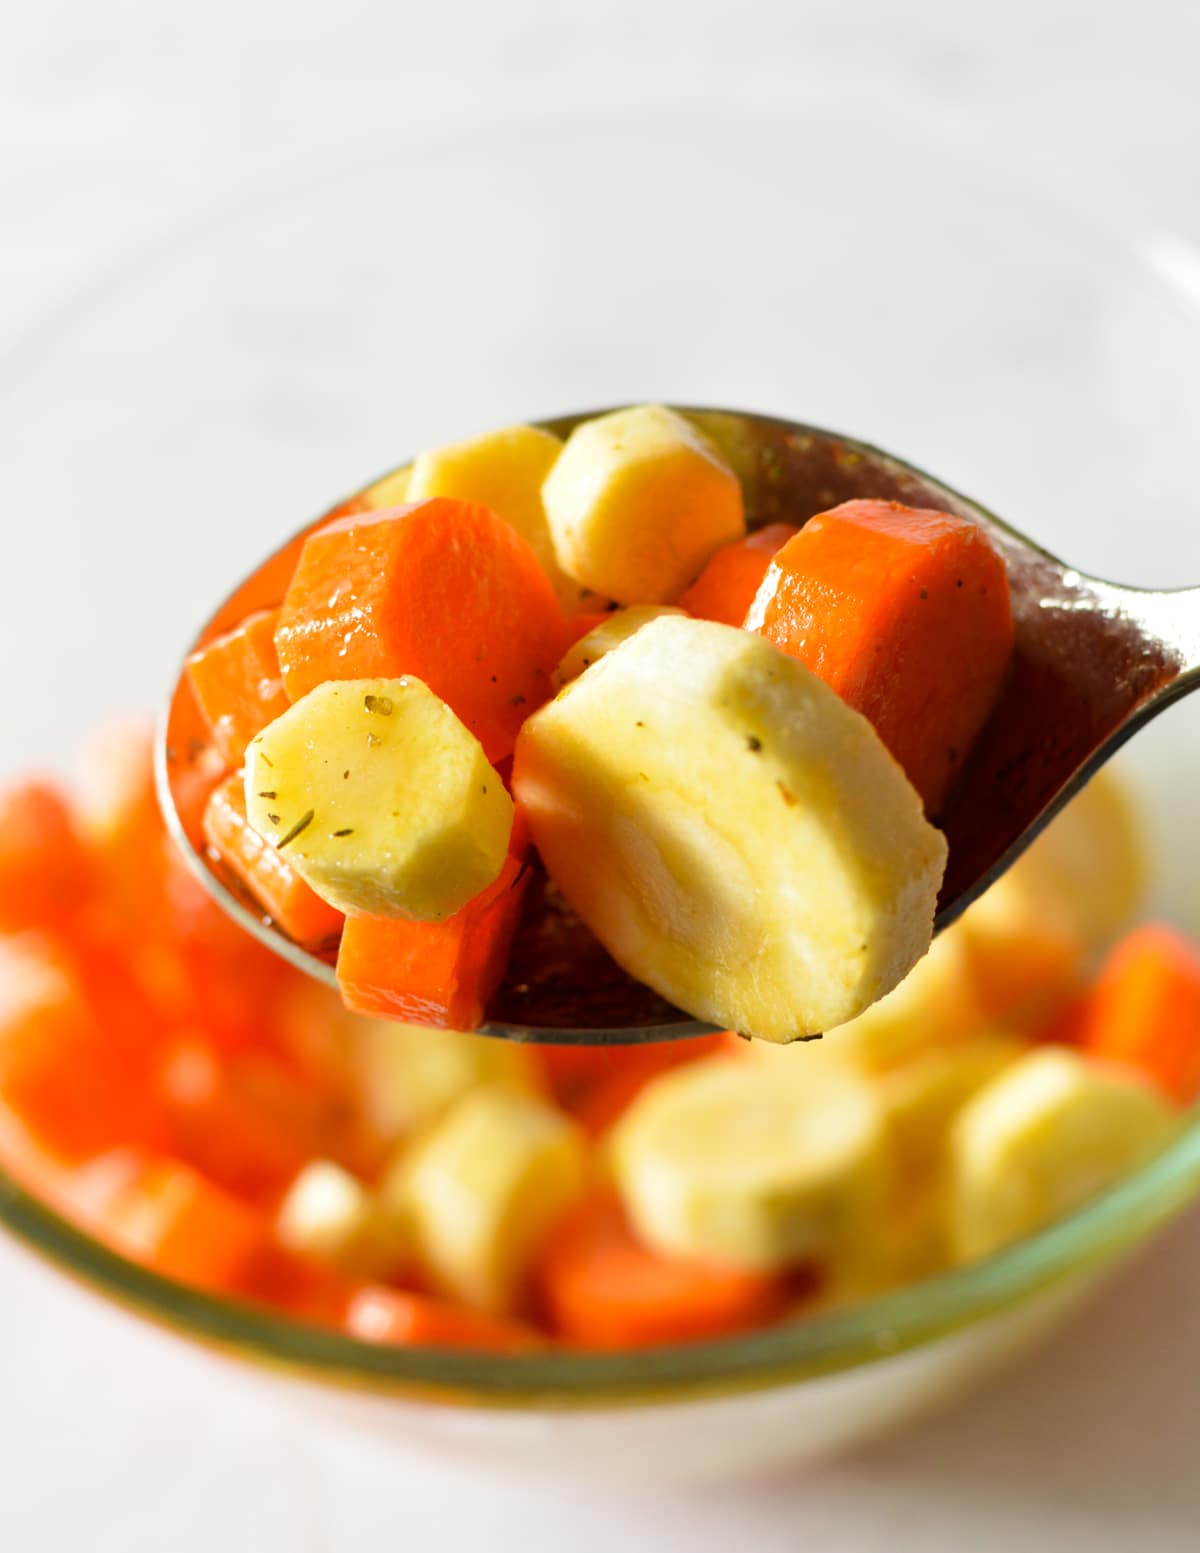 a spoonful of carrots and parsnips coated in honey.